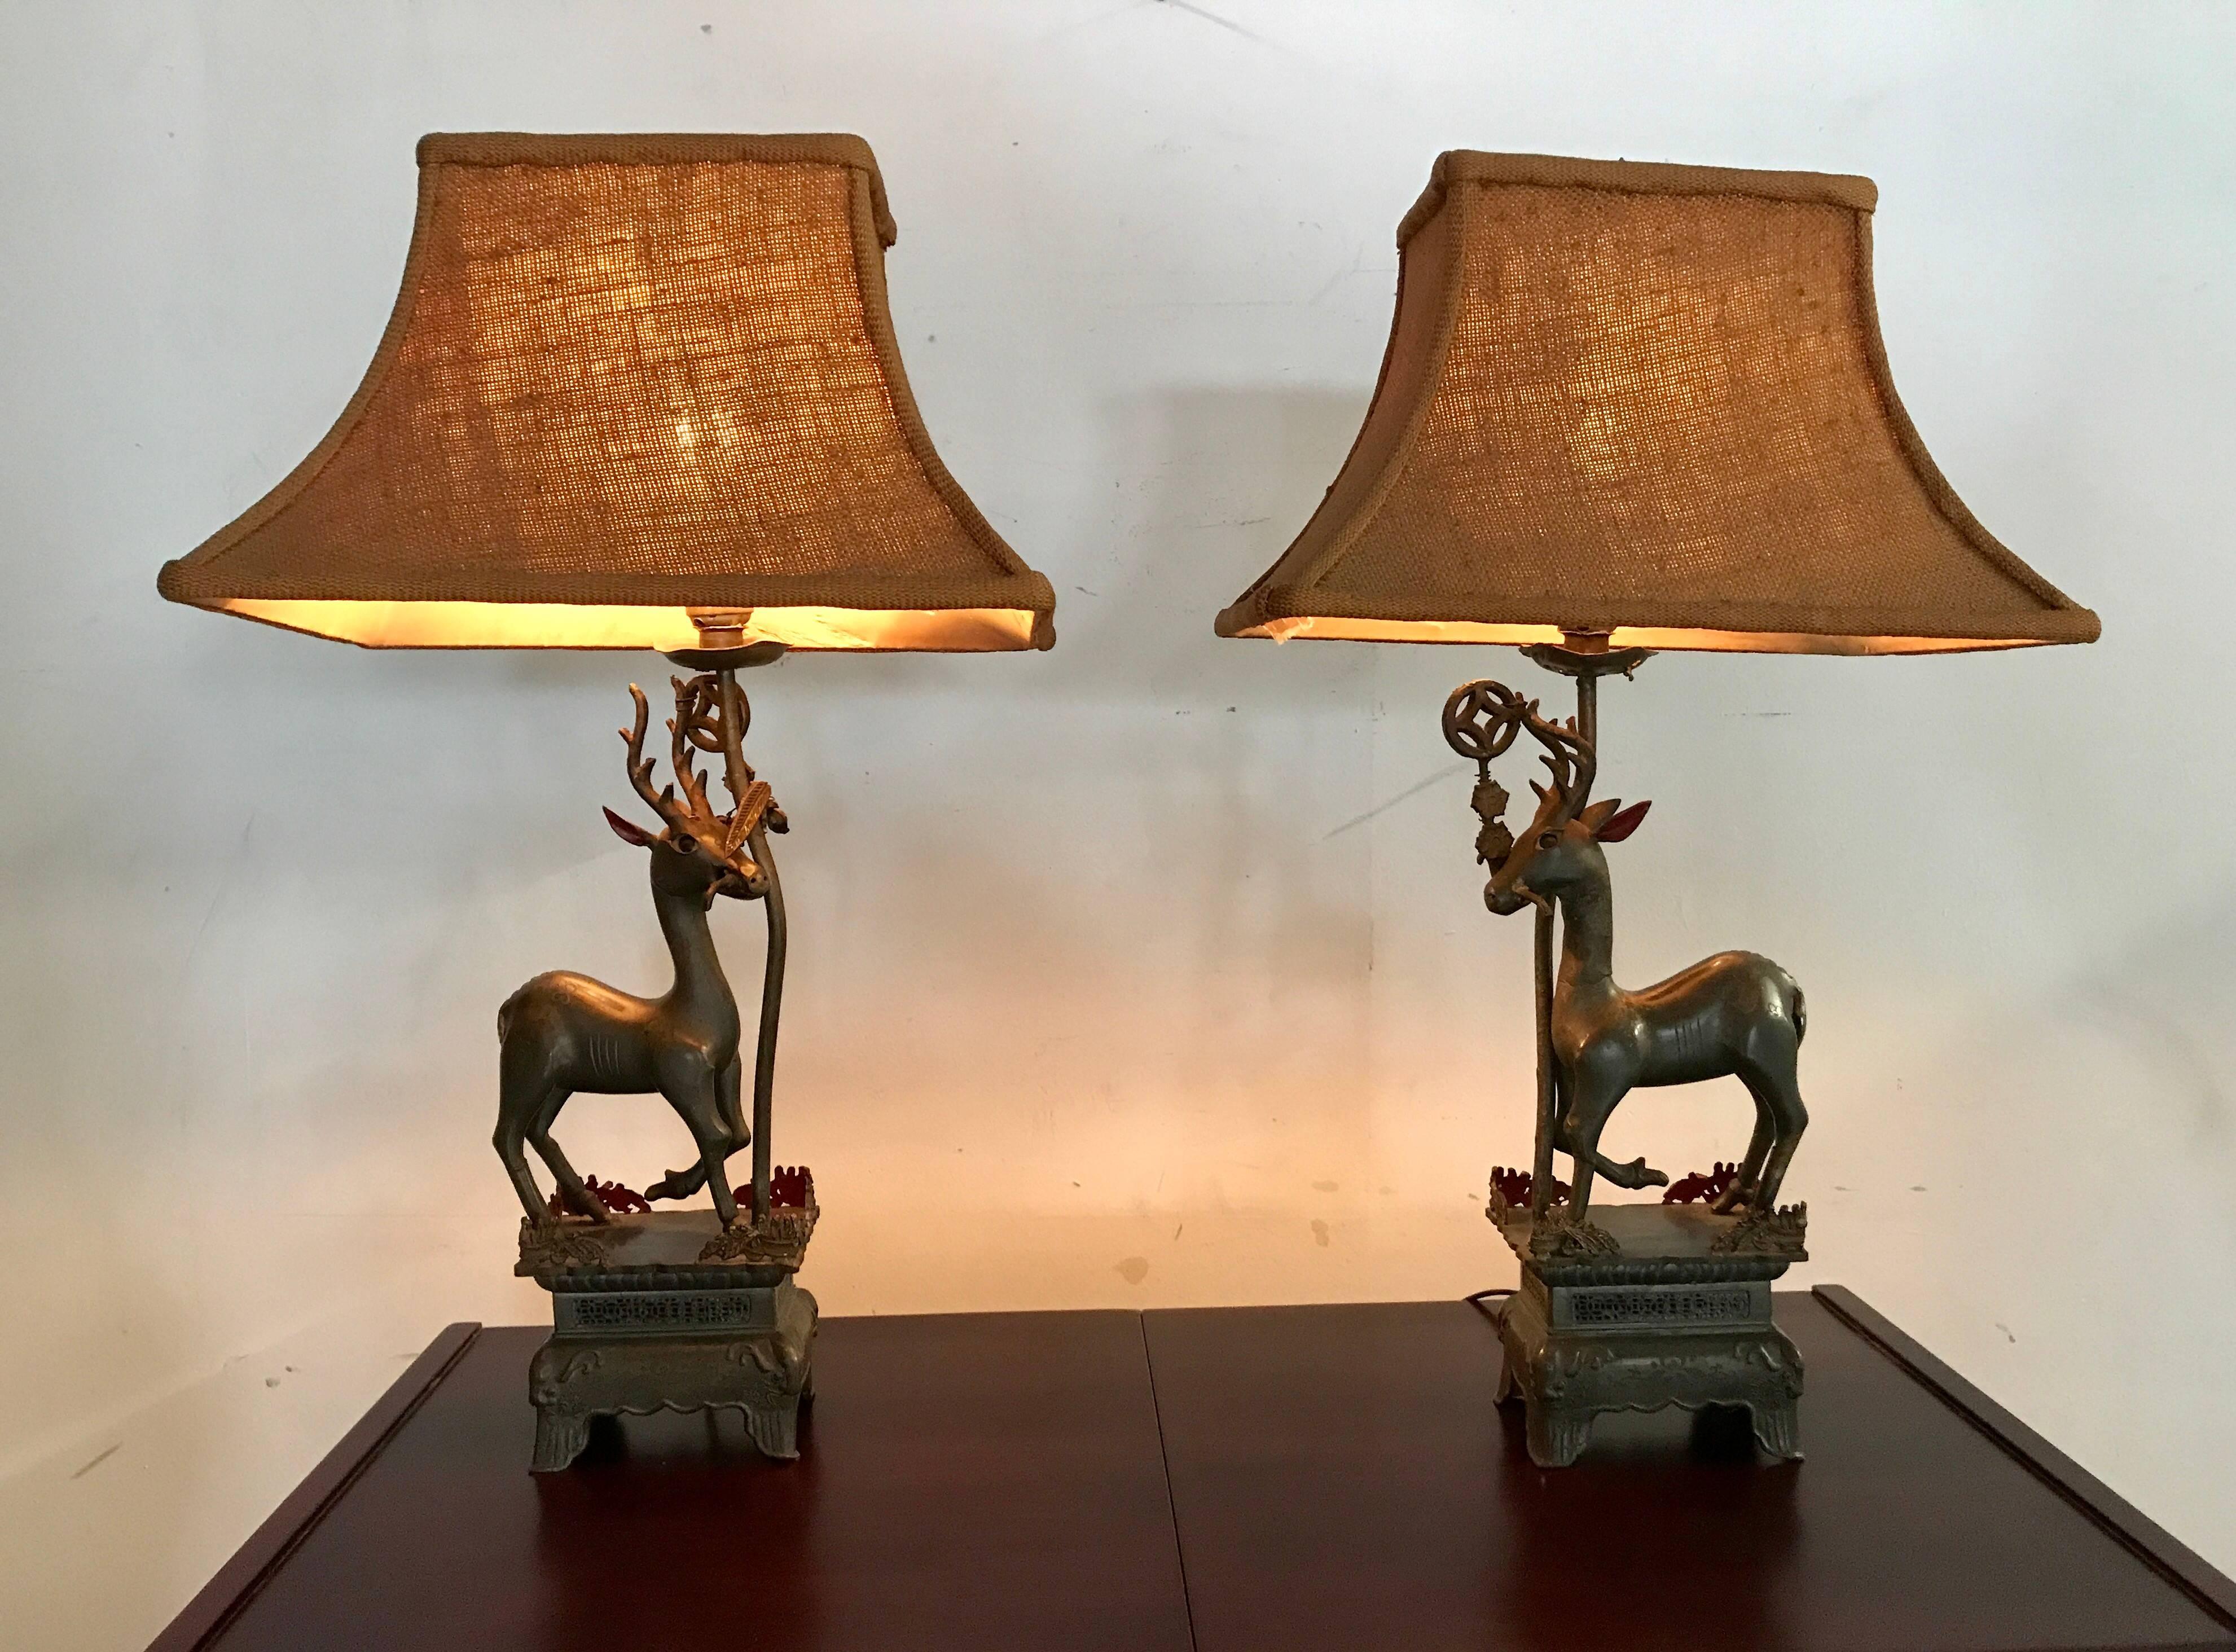 Etched Pair of Antique Chinese Pewter Gazelle Themed Table Lamps